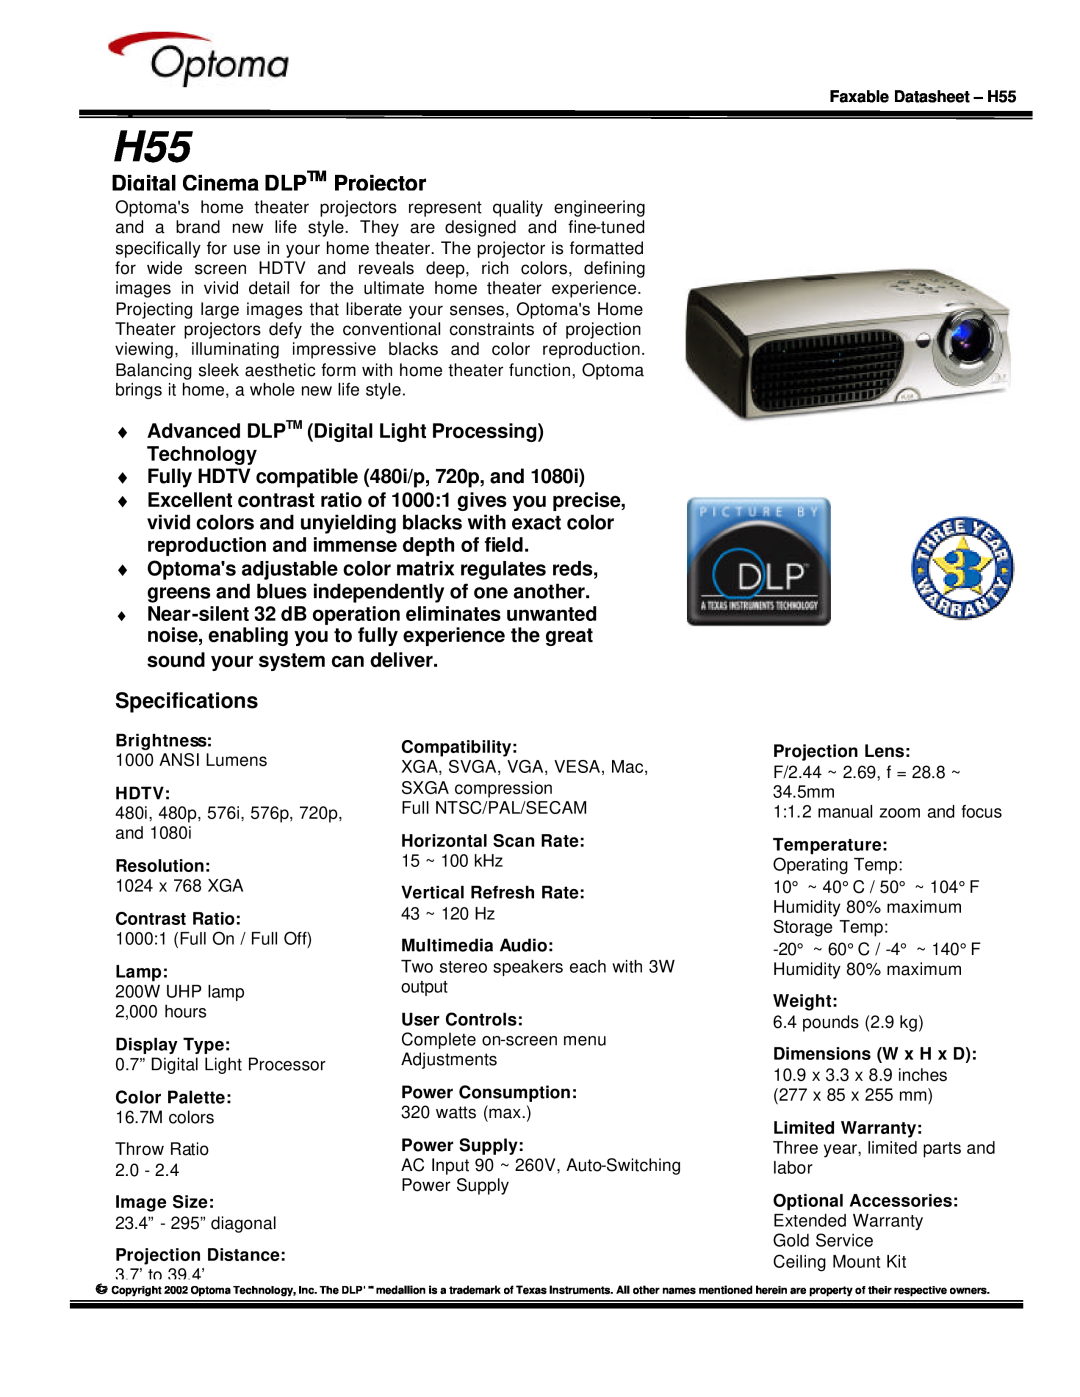 Optoma Technology H55 specifications Digital Cinema DLPTM Projector, Specifications 